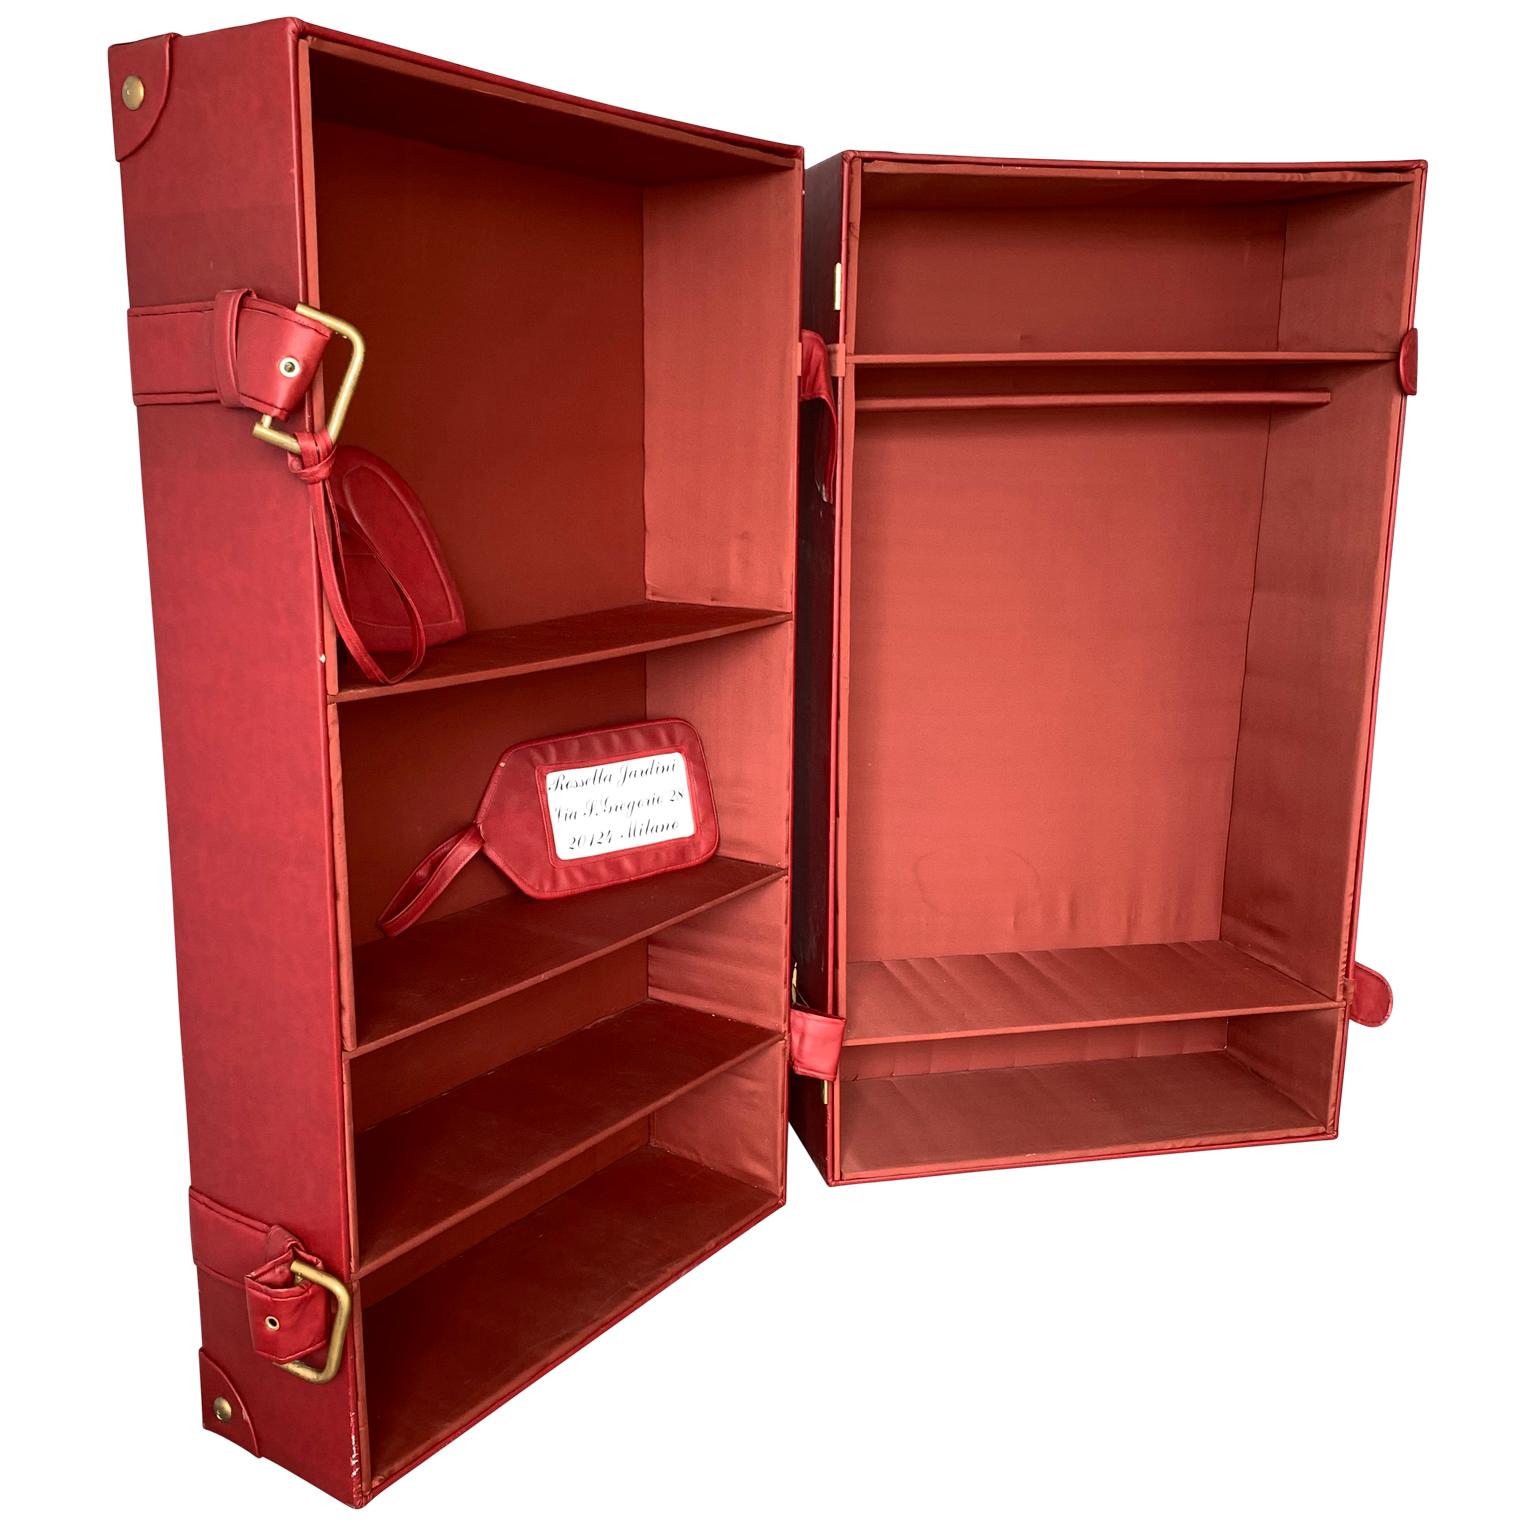 Modern Massive Suitcase Wardrobe Display-Case from Milan, Italy Flagship Store